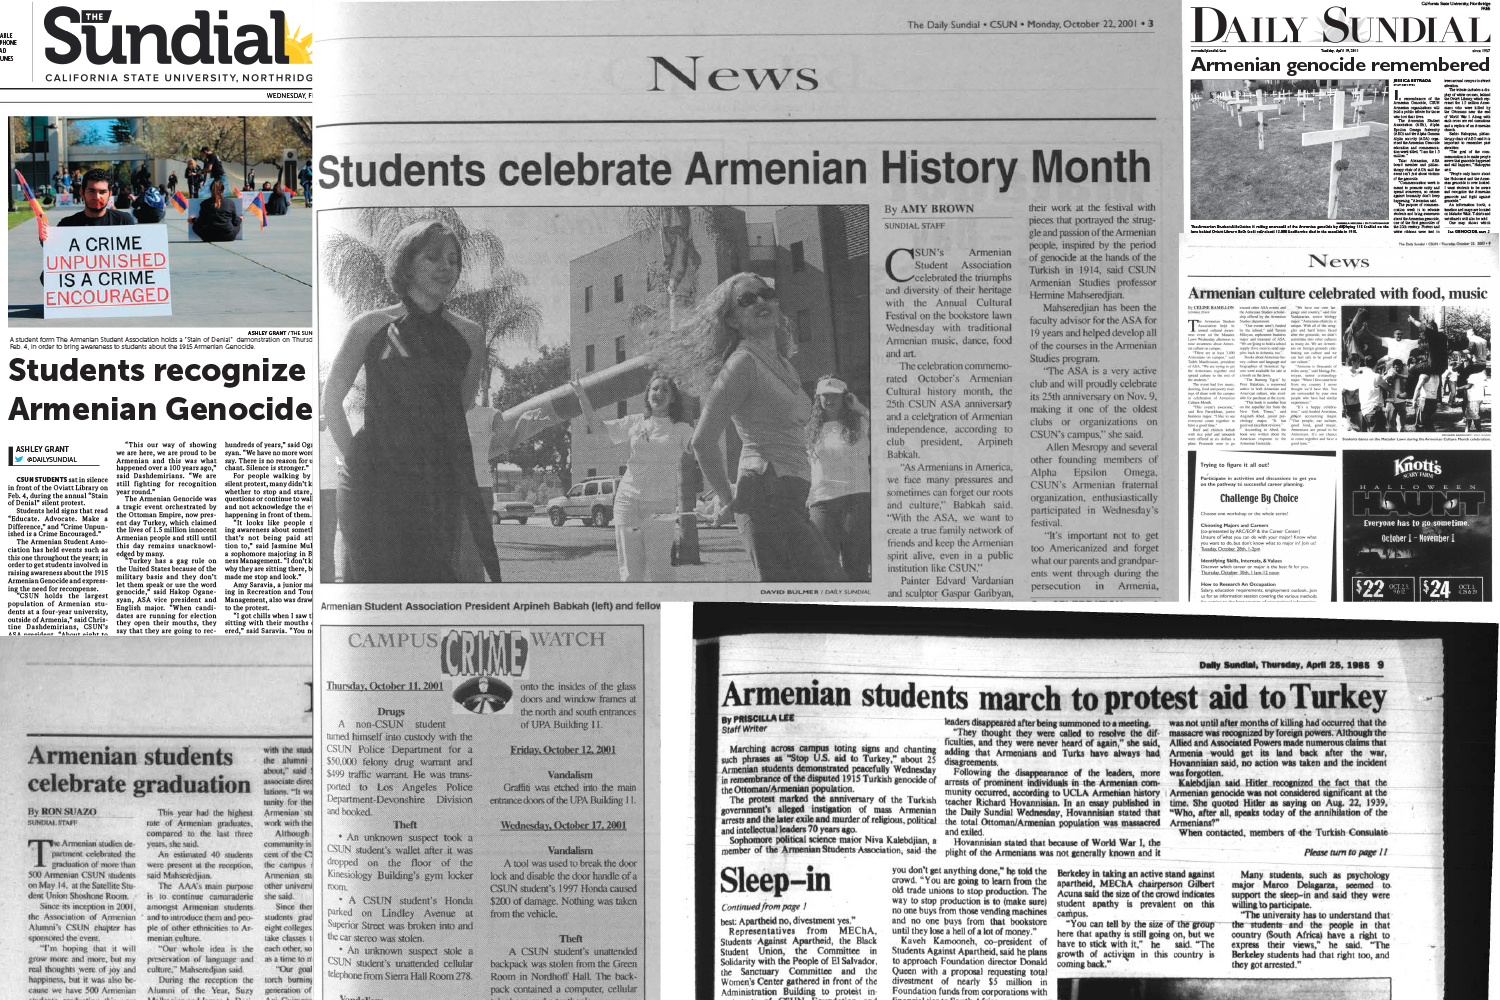 Daily Armenian News from Around the World • MassisPost